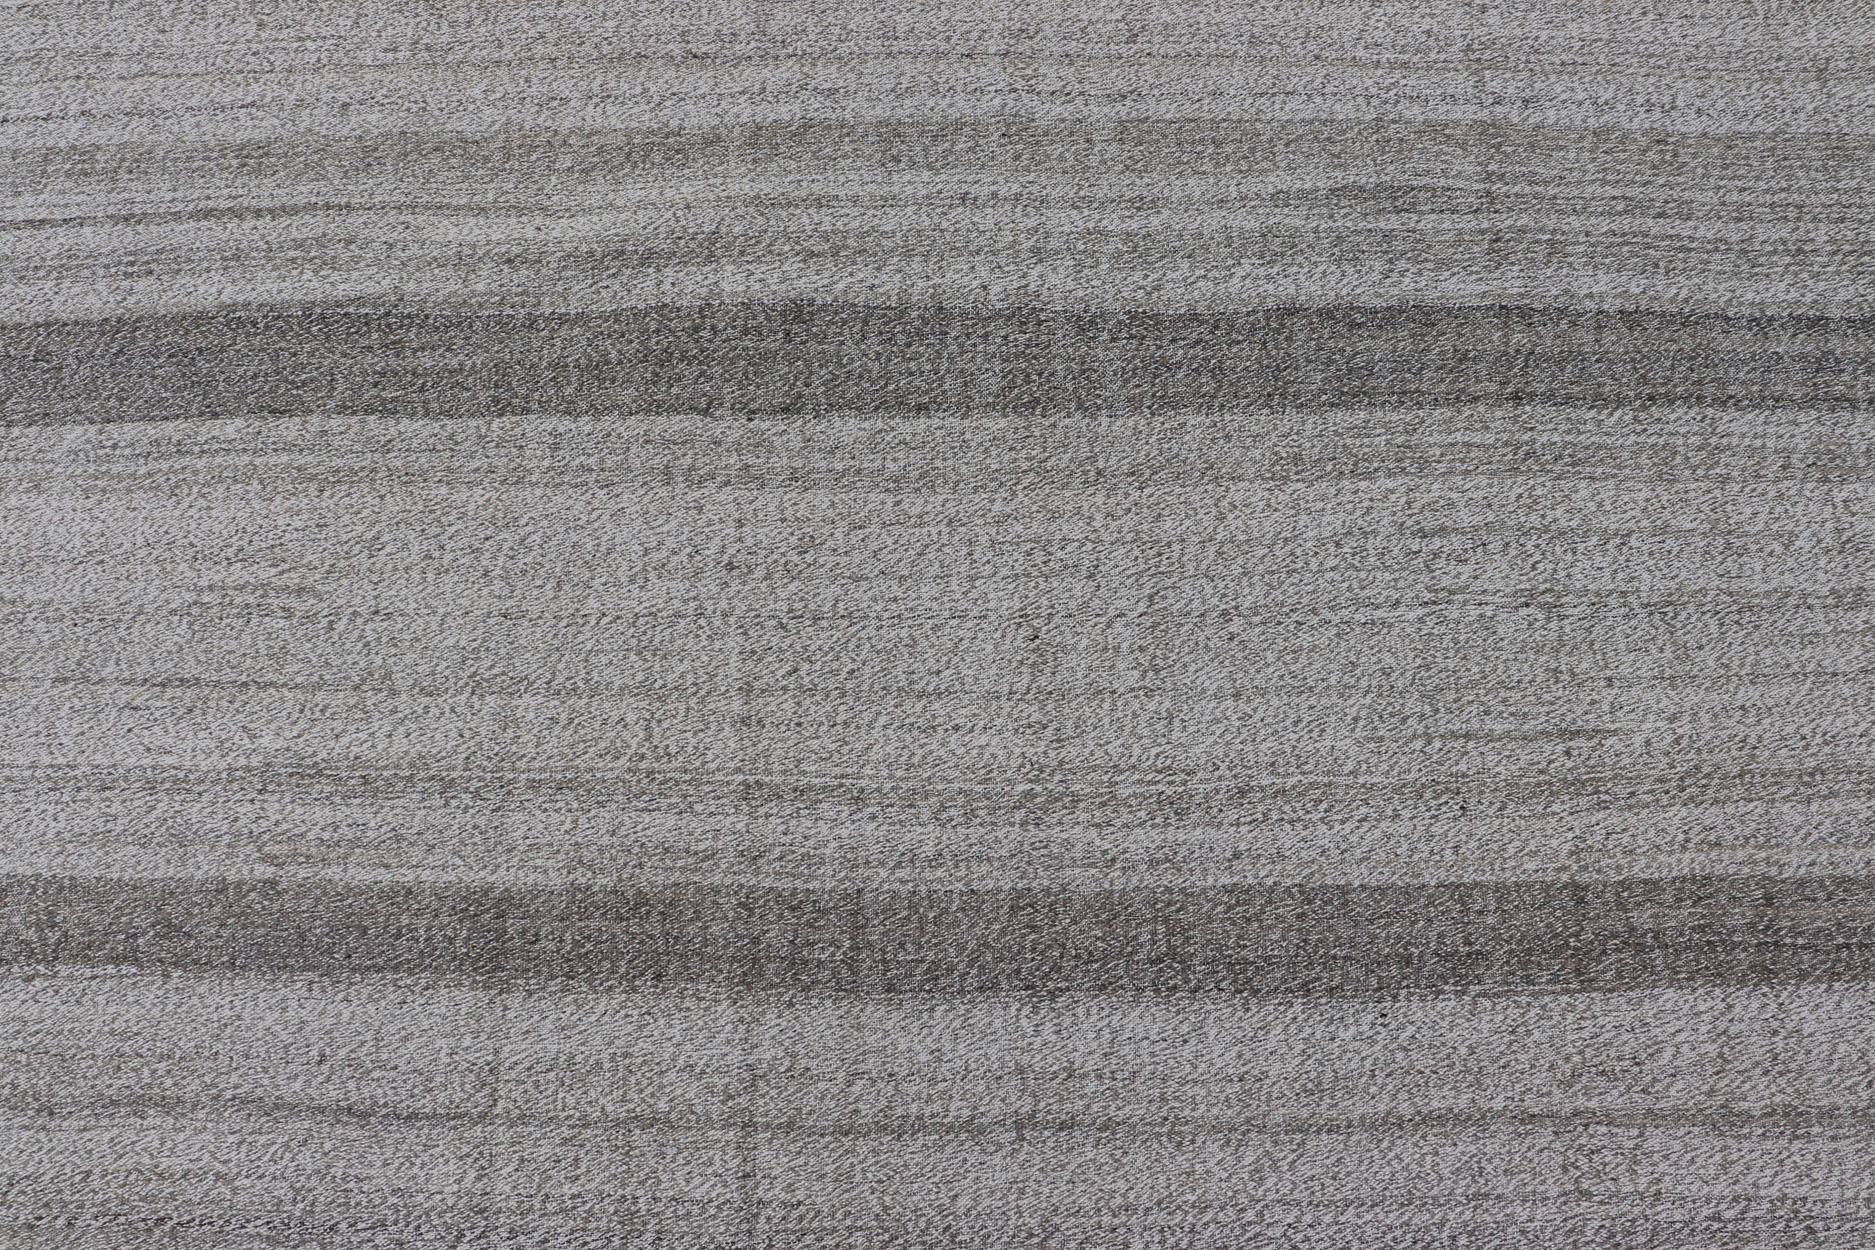  Modern Kilim Rug with Stripes in Neutral tones Shades of Gray  For Sale 2